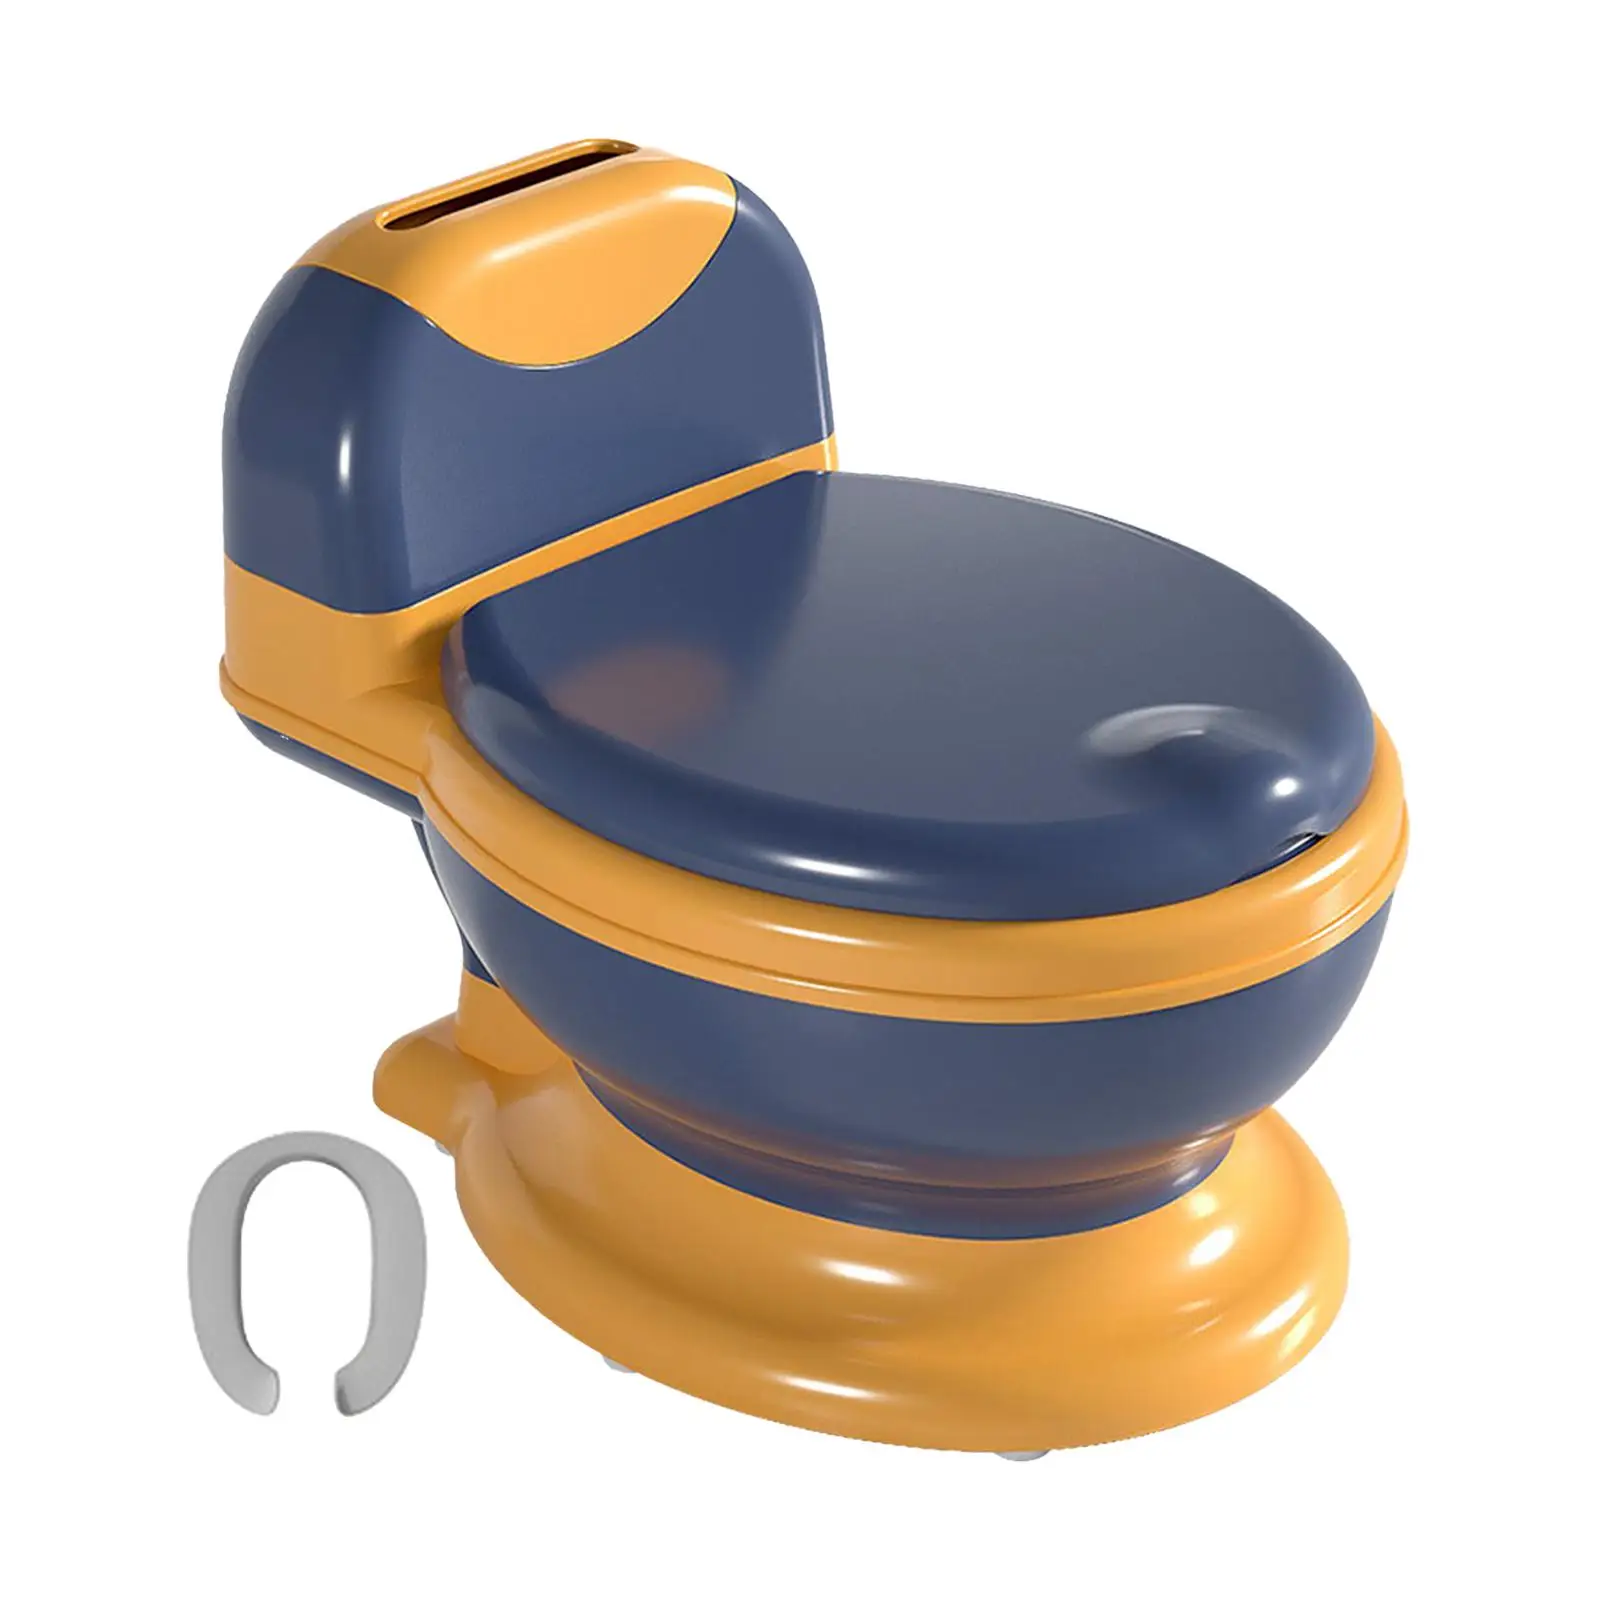 Potty Train Toilet Portable Comfortable Potty Train Seat Realistic Toilet Real Feel Potty for Toddlers Baby Girls Children